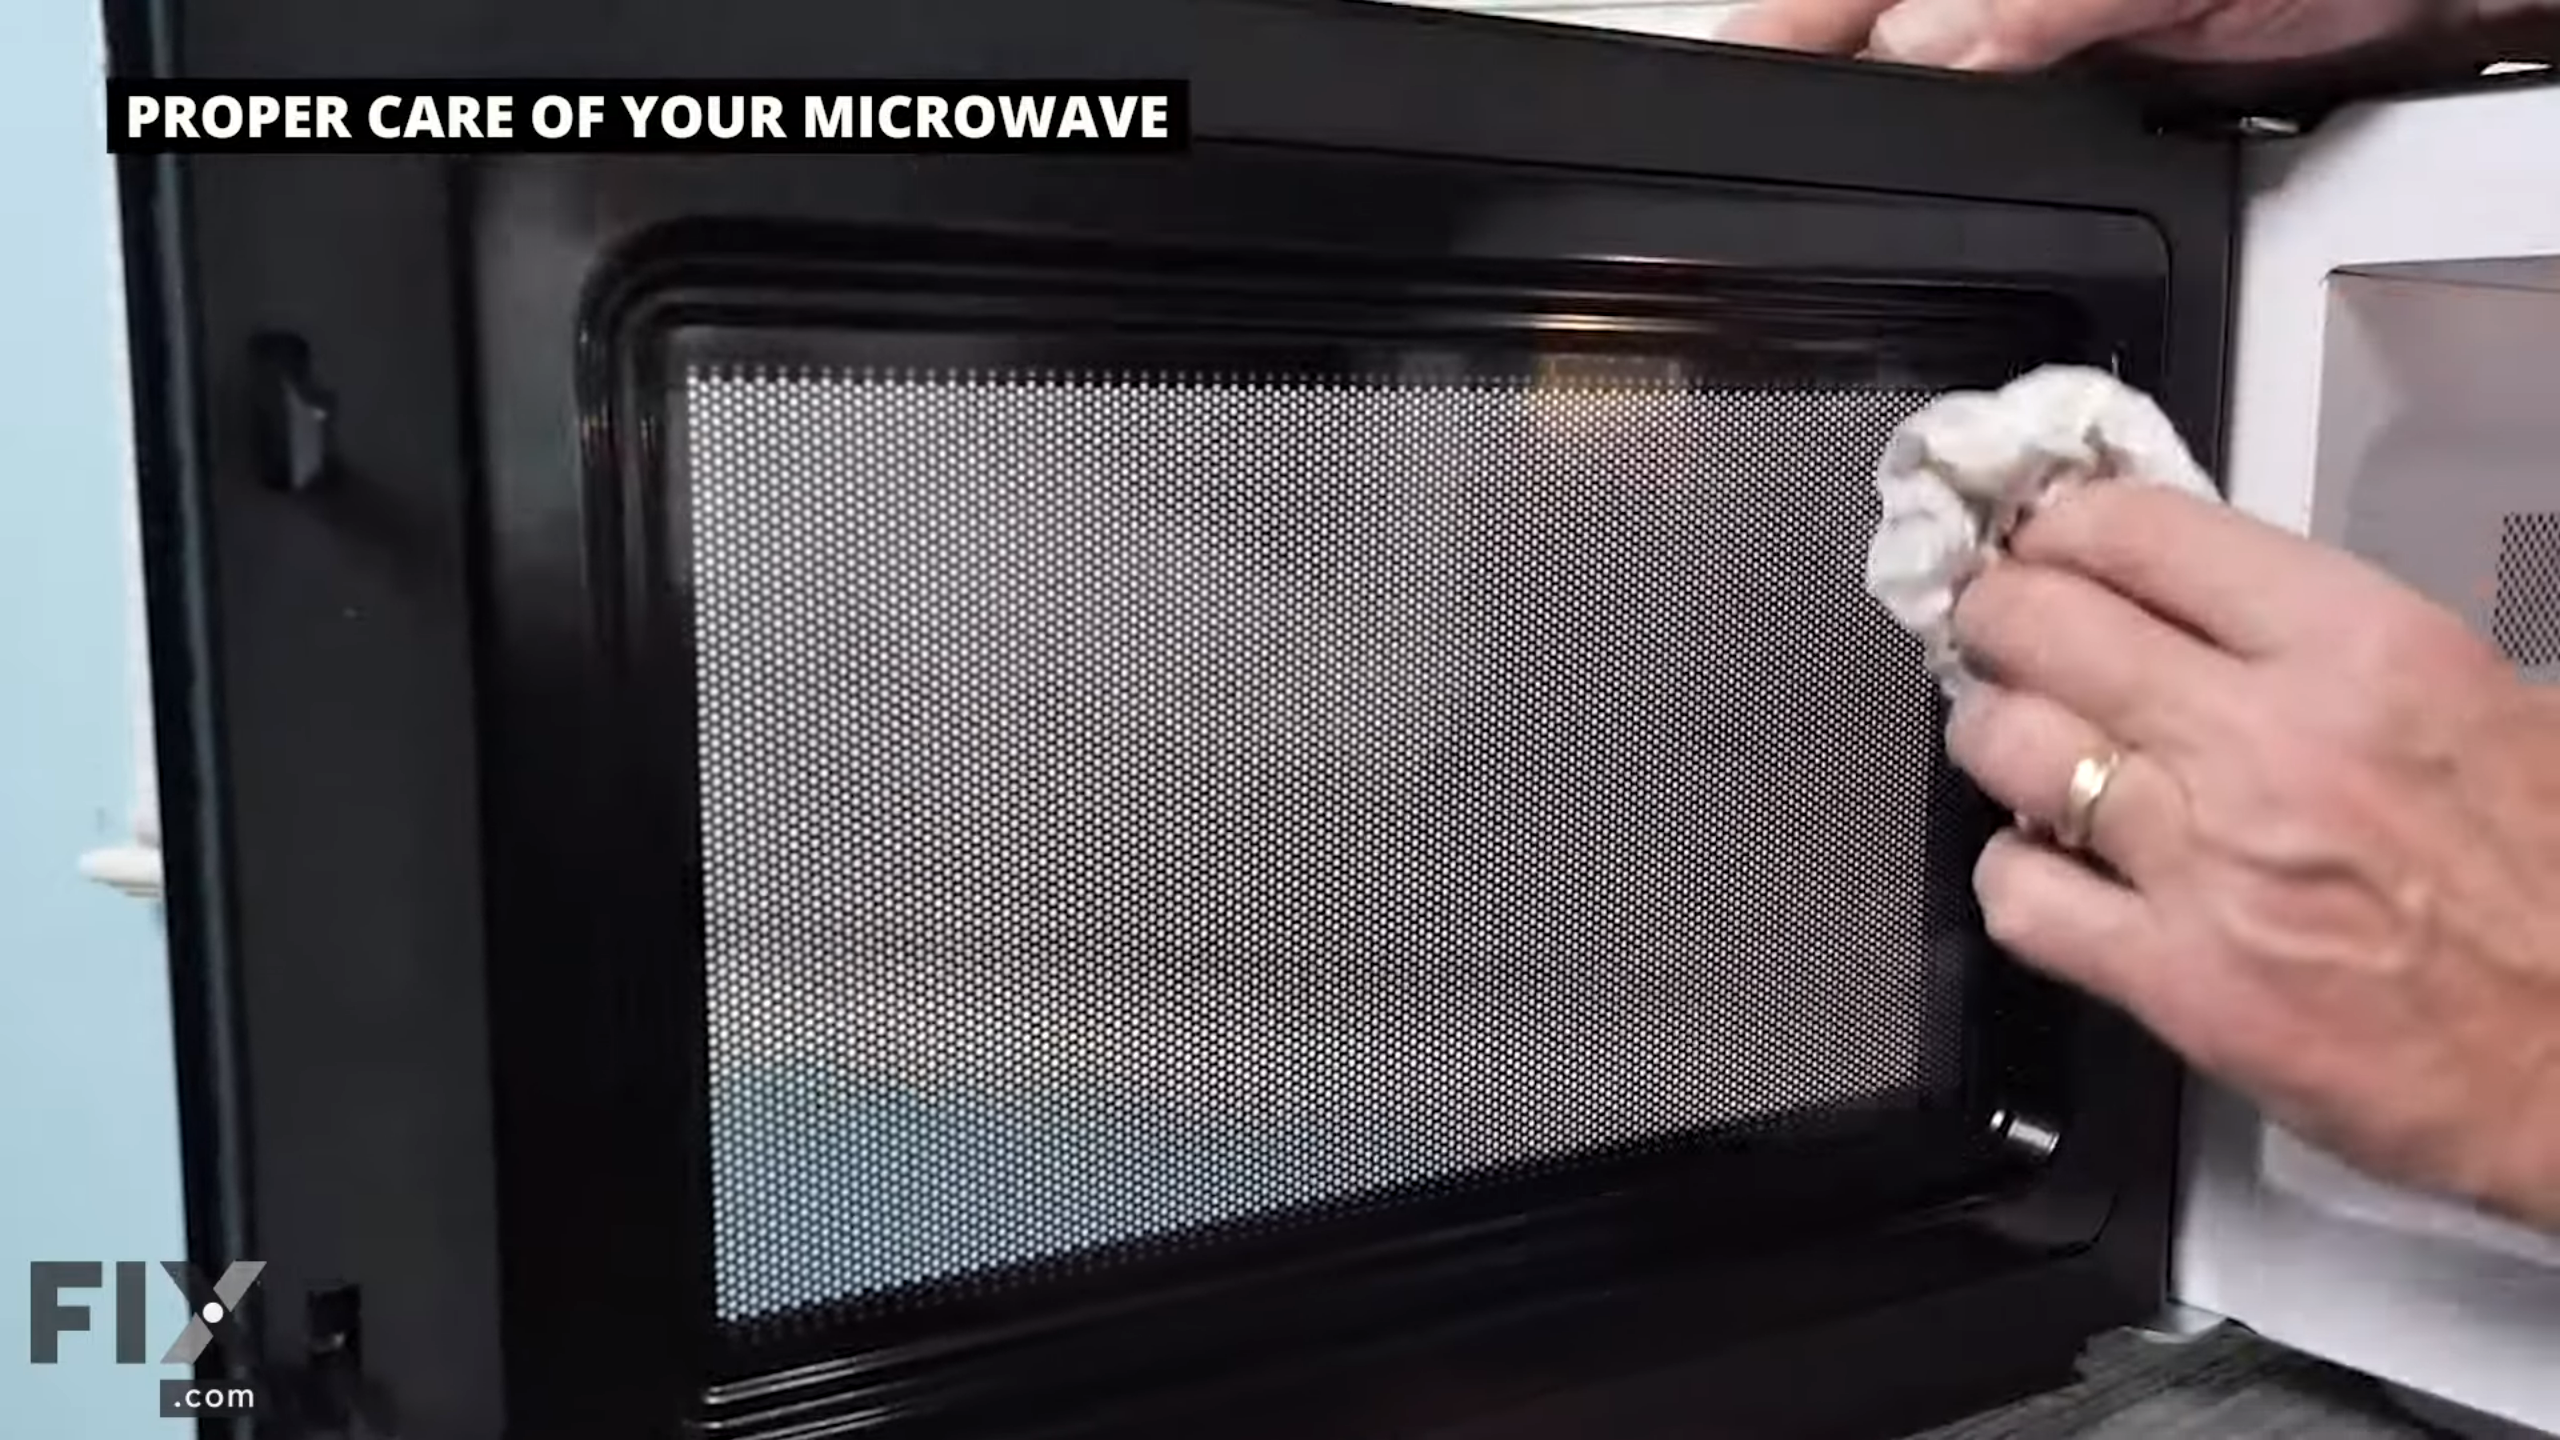 Hand with white cloth cleaning the inside portion of a black microwave door.